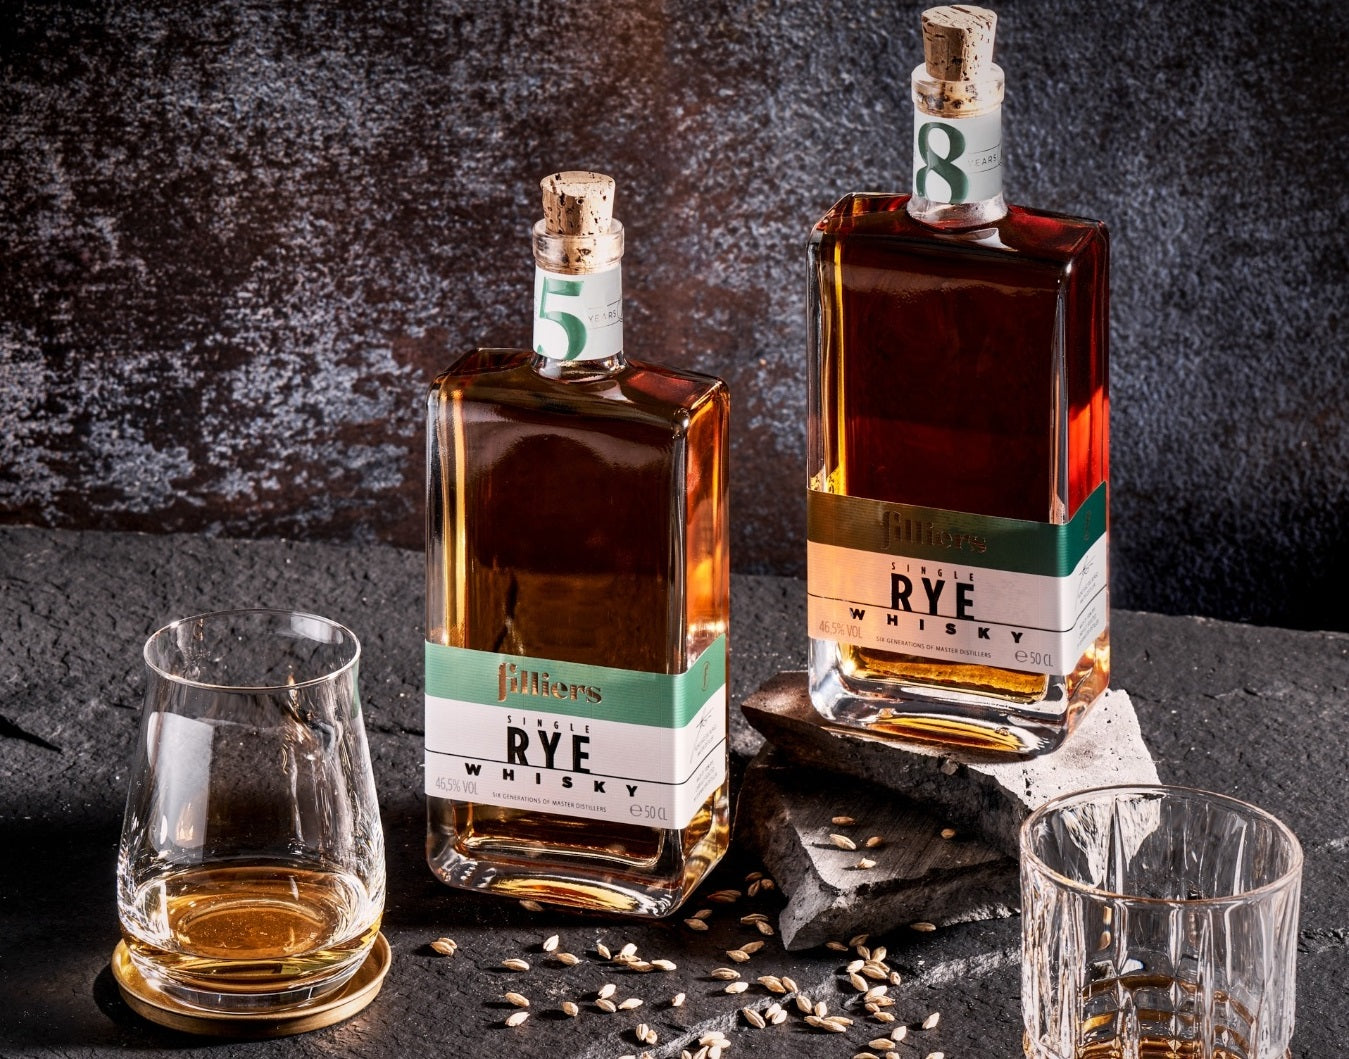 Introducing Filliers 100% Rye Whisky - a true embodiment of tradition and craftsmanship